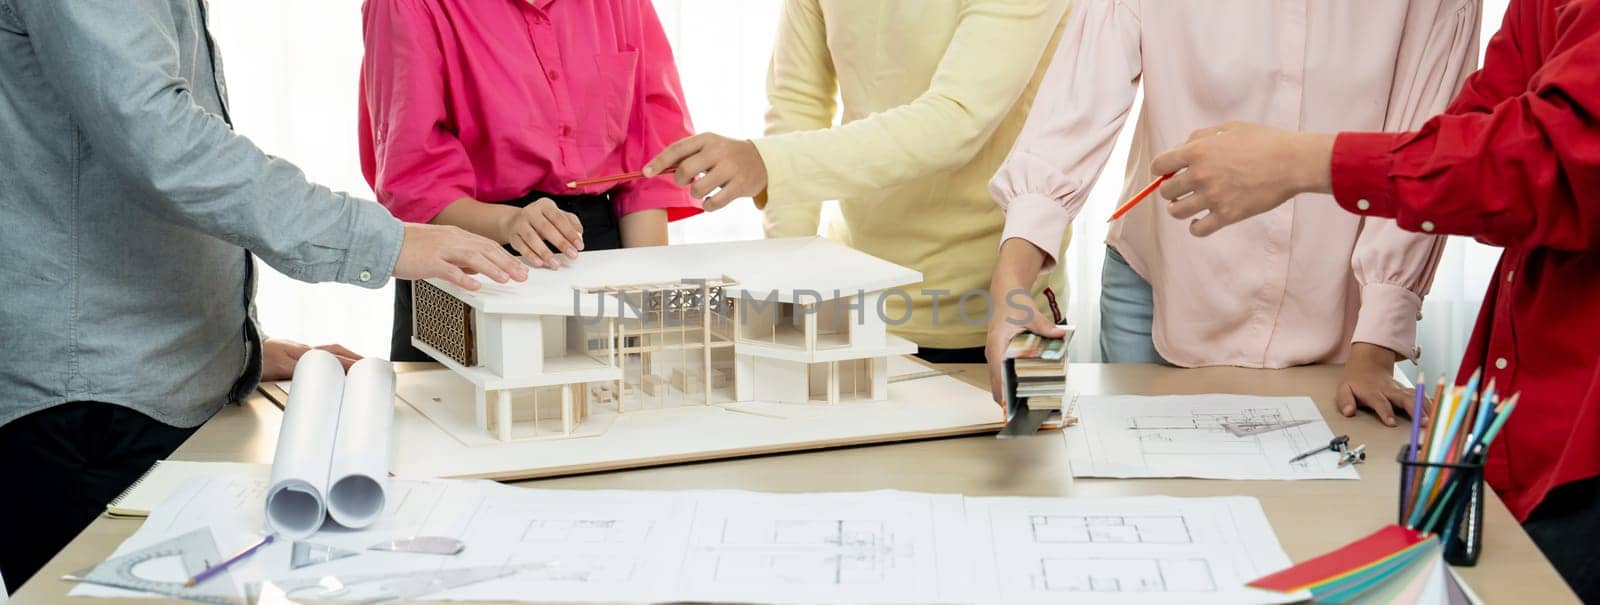 A cropped image of professional interior design team discuss about house material while smart engineer team brainstorm about house construction. Creative working and teamwork concept. Variegated